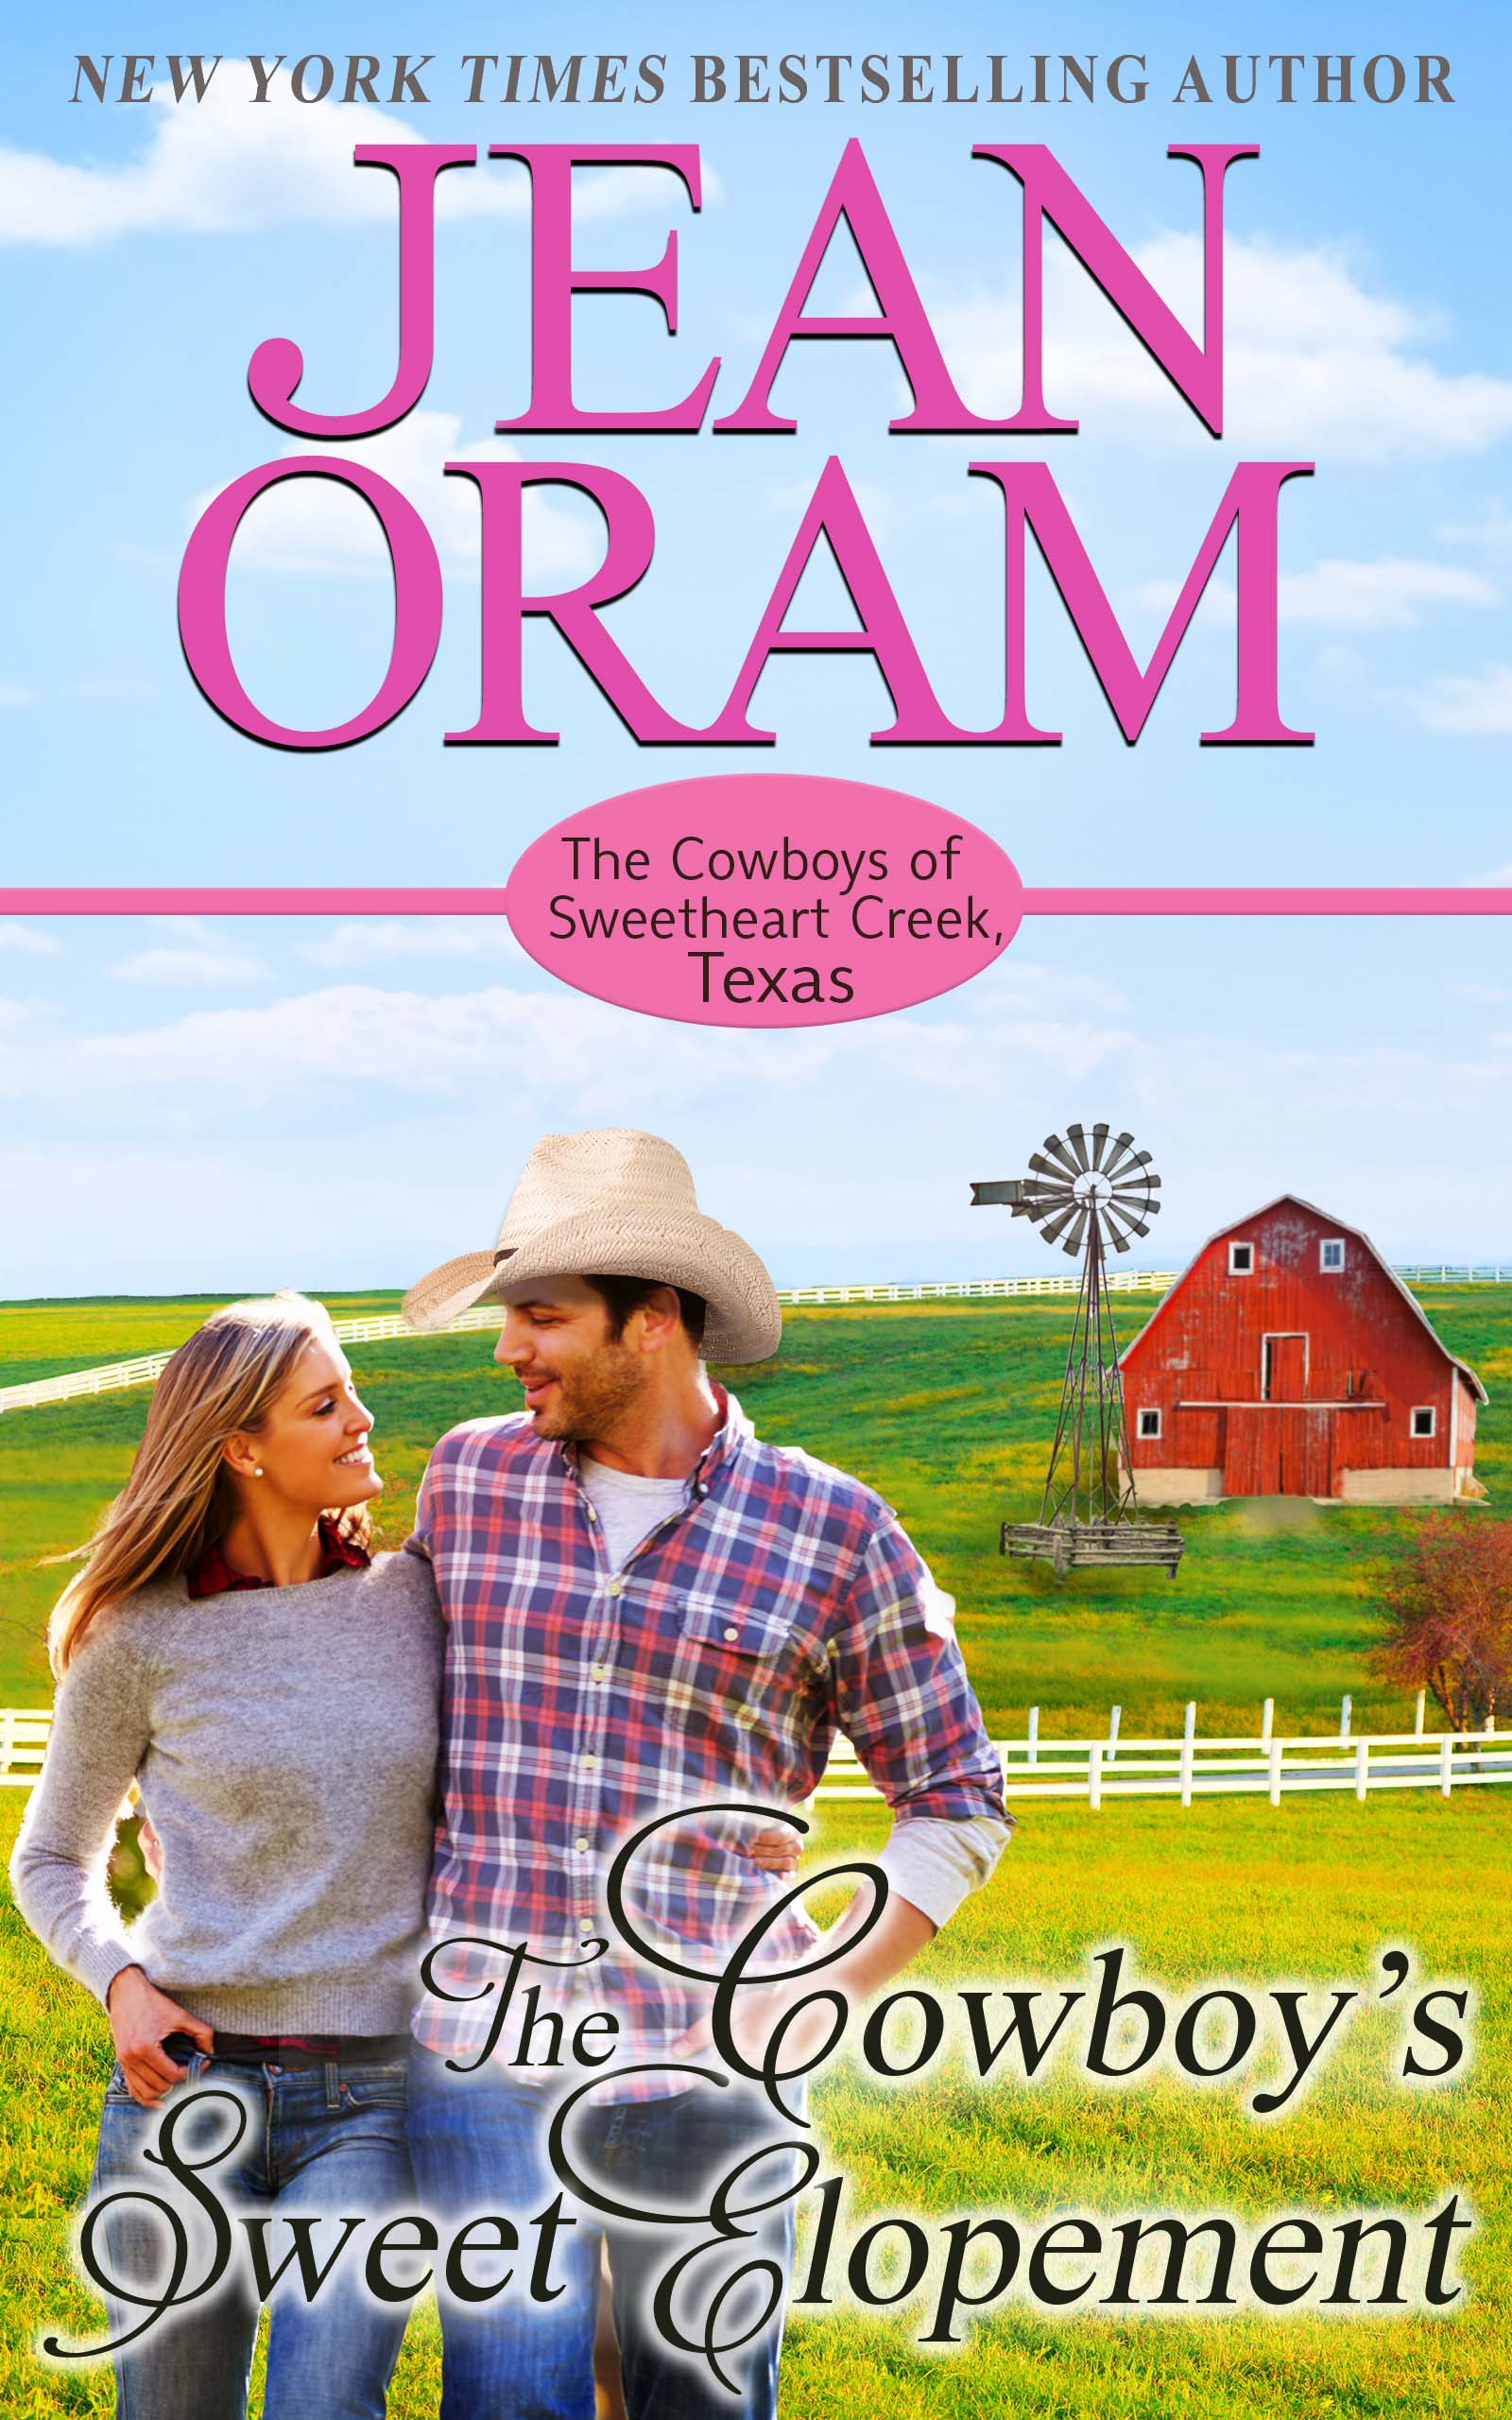 The Cowboy's Sweet Elopement, book 4, Jean Oram's The Cowboys of Sweetheart Creek, Texas series.